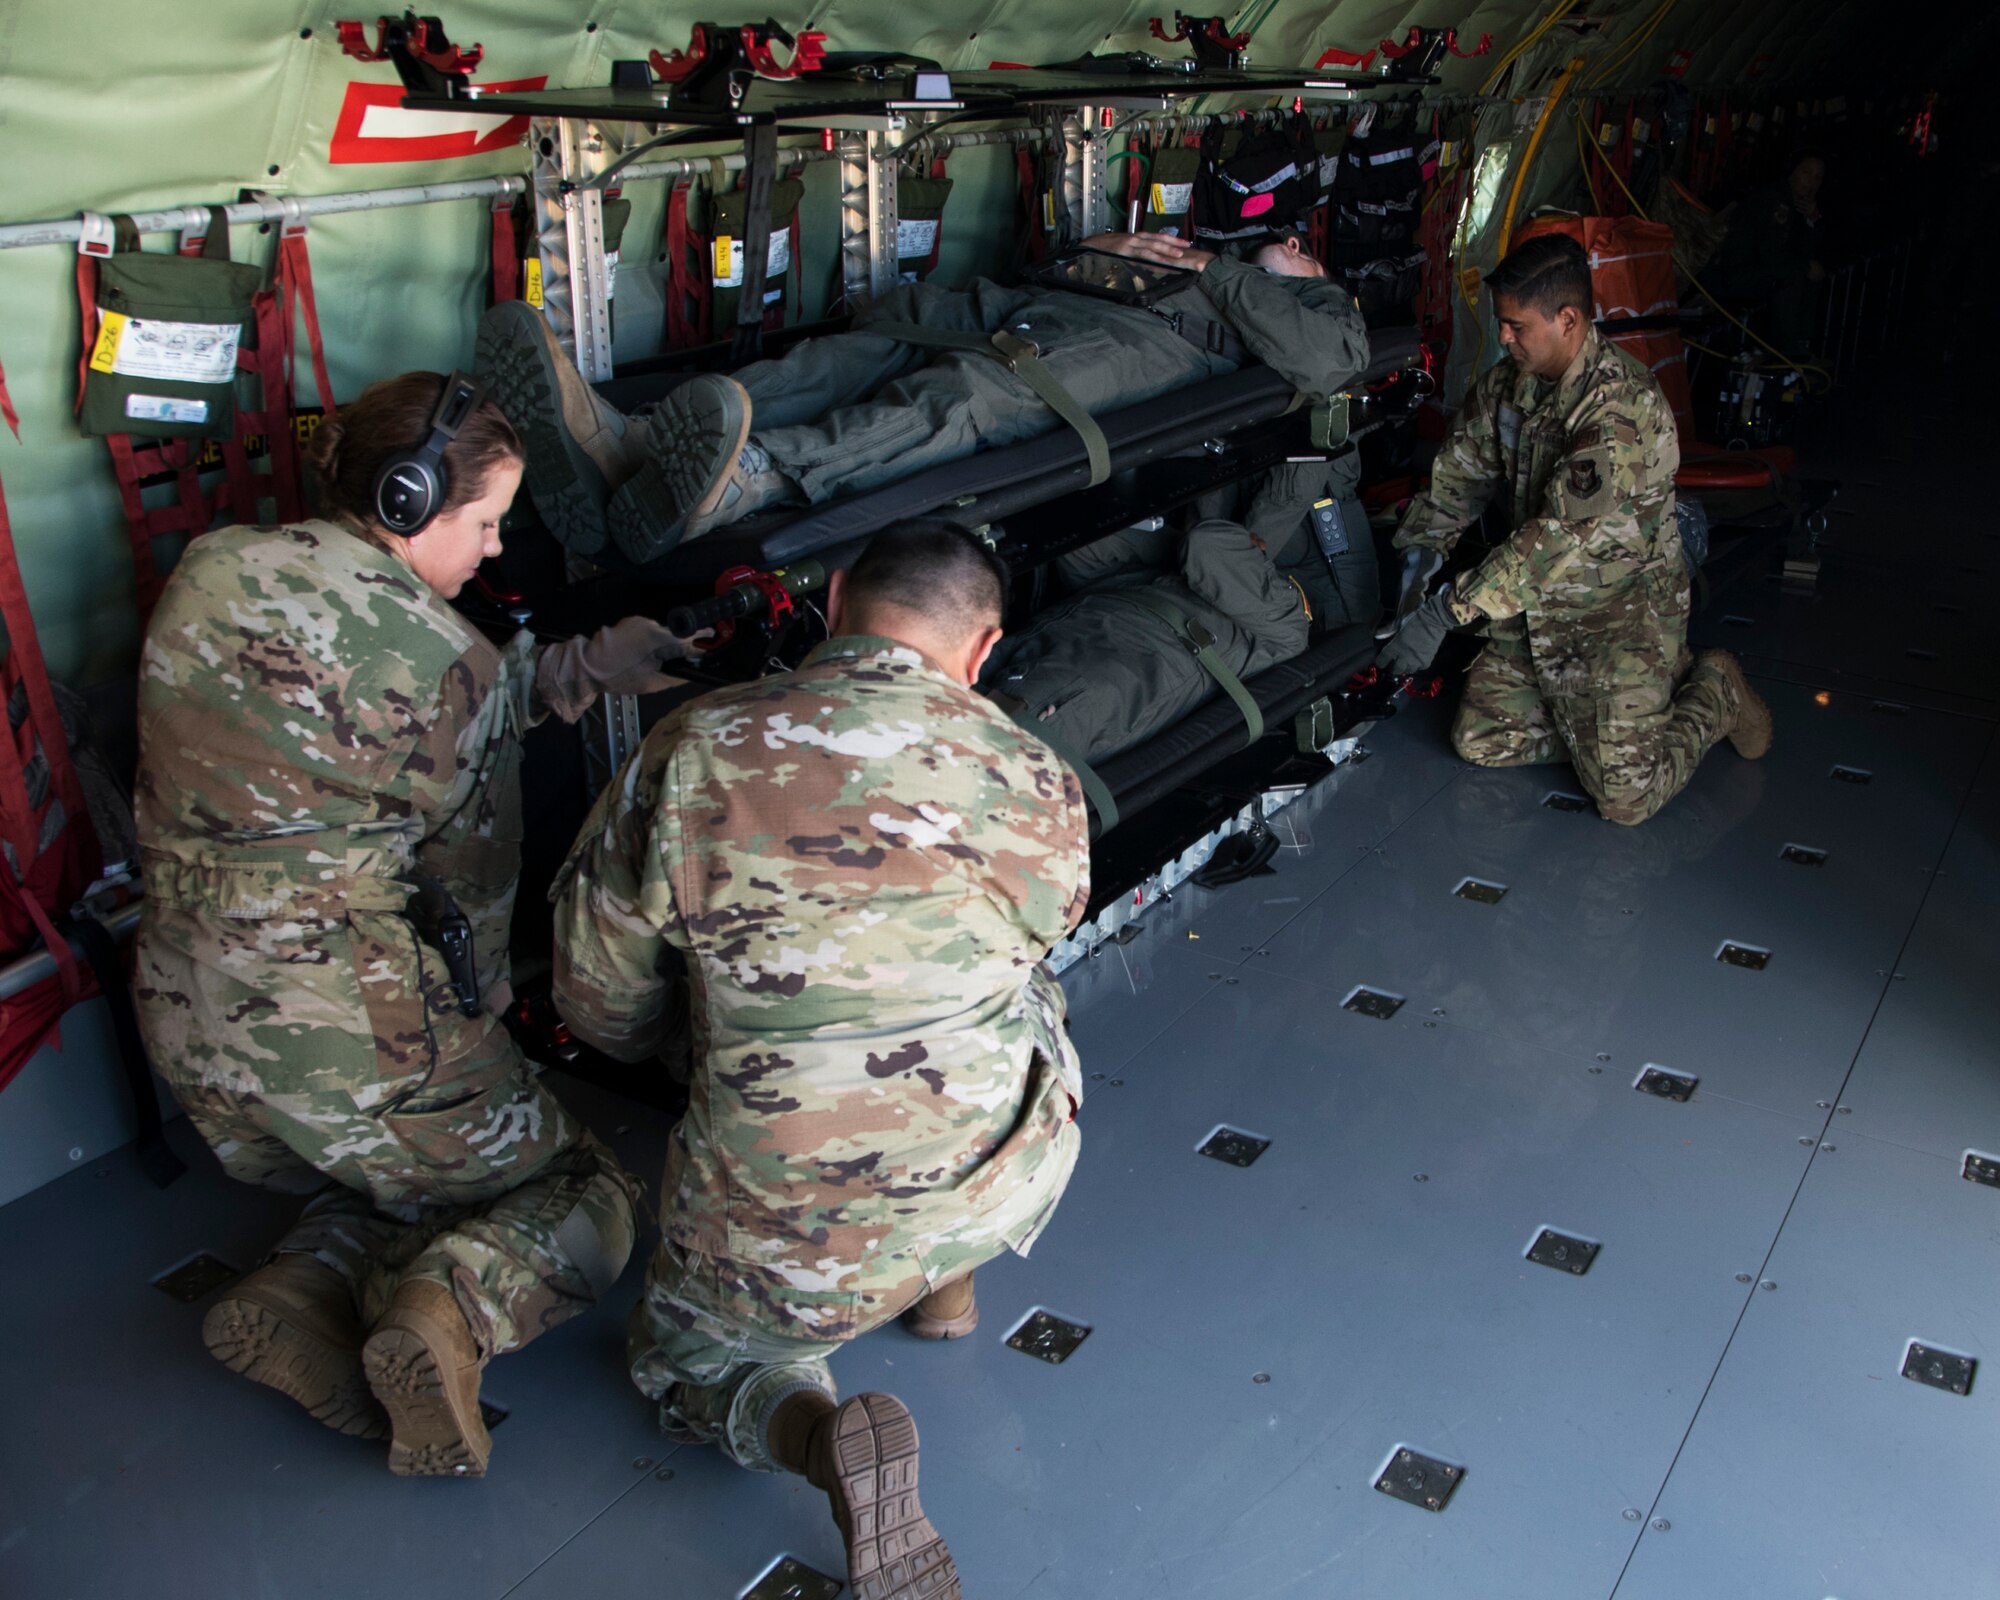 Members of the 459th Aeromedical Evacuation Squadron place a patient onto a Stanchion Litter System in preparation for an off station trainer Sept. 20, 2019, at Joint Base Andrews, Md. The team conducted the training on the way to Wright Patterson Air Force Base, Ohio, where they also ran in the Air Force Marathon. (U.S. Air Force photo by Staff Sgt. Cierra Presentado/Released)